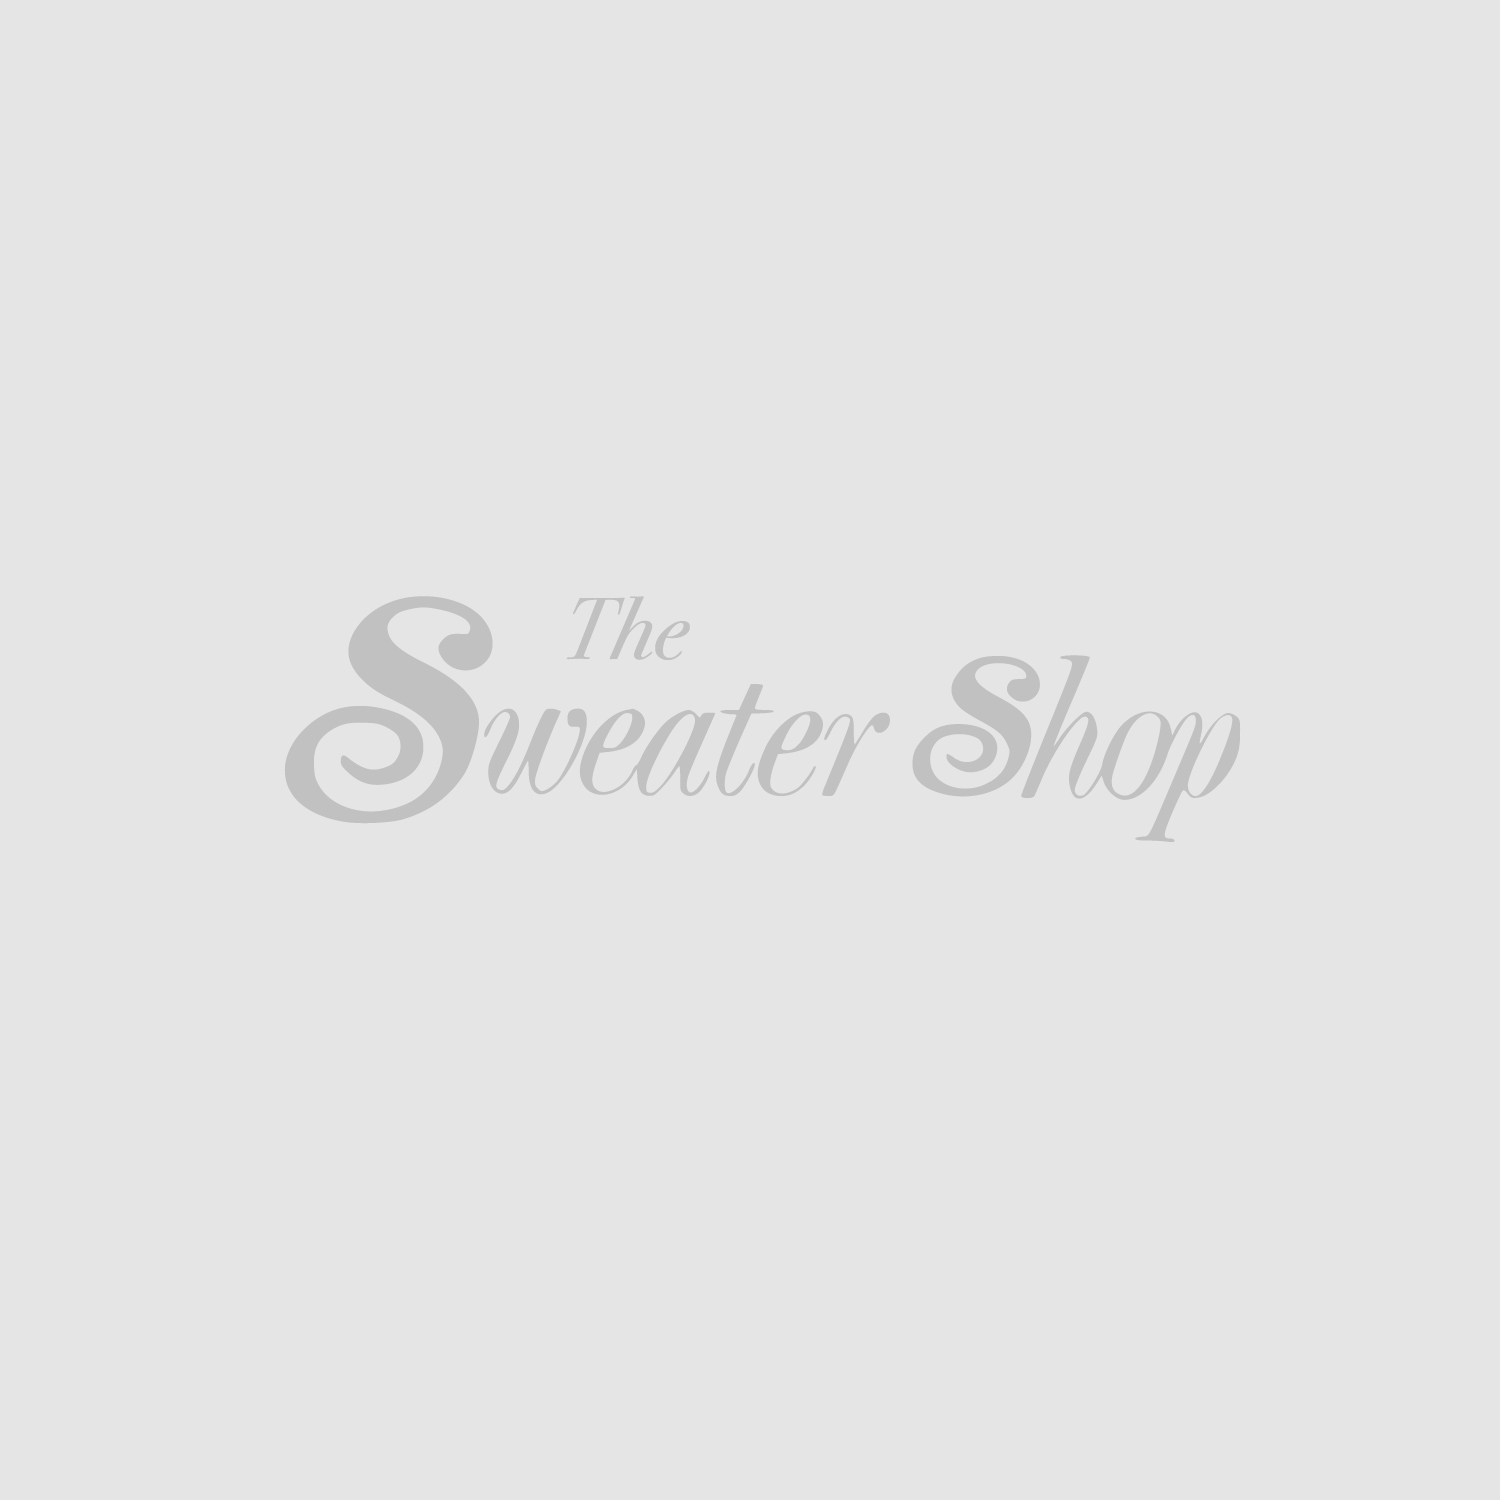 The Sweater Shop | The Sweater Shop, Ireland